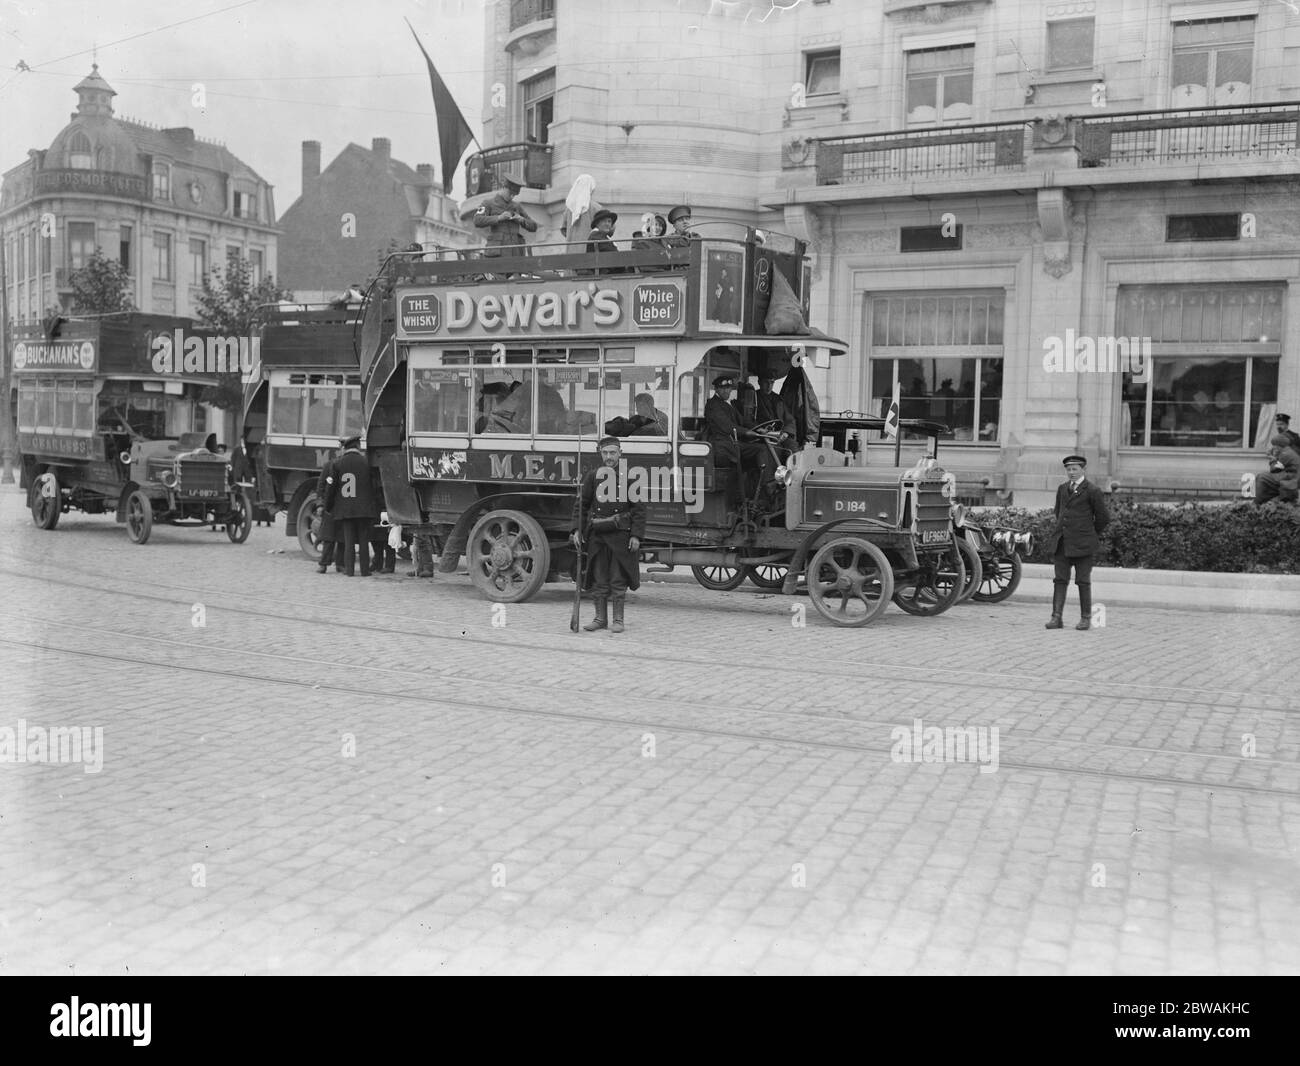 London motor buses in Belgium London buses were used to carry troops across Belgium and France during WW1 Stock Photo